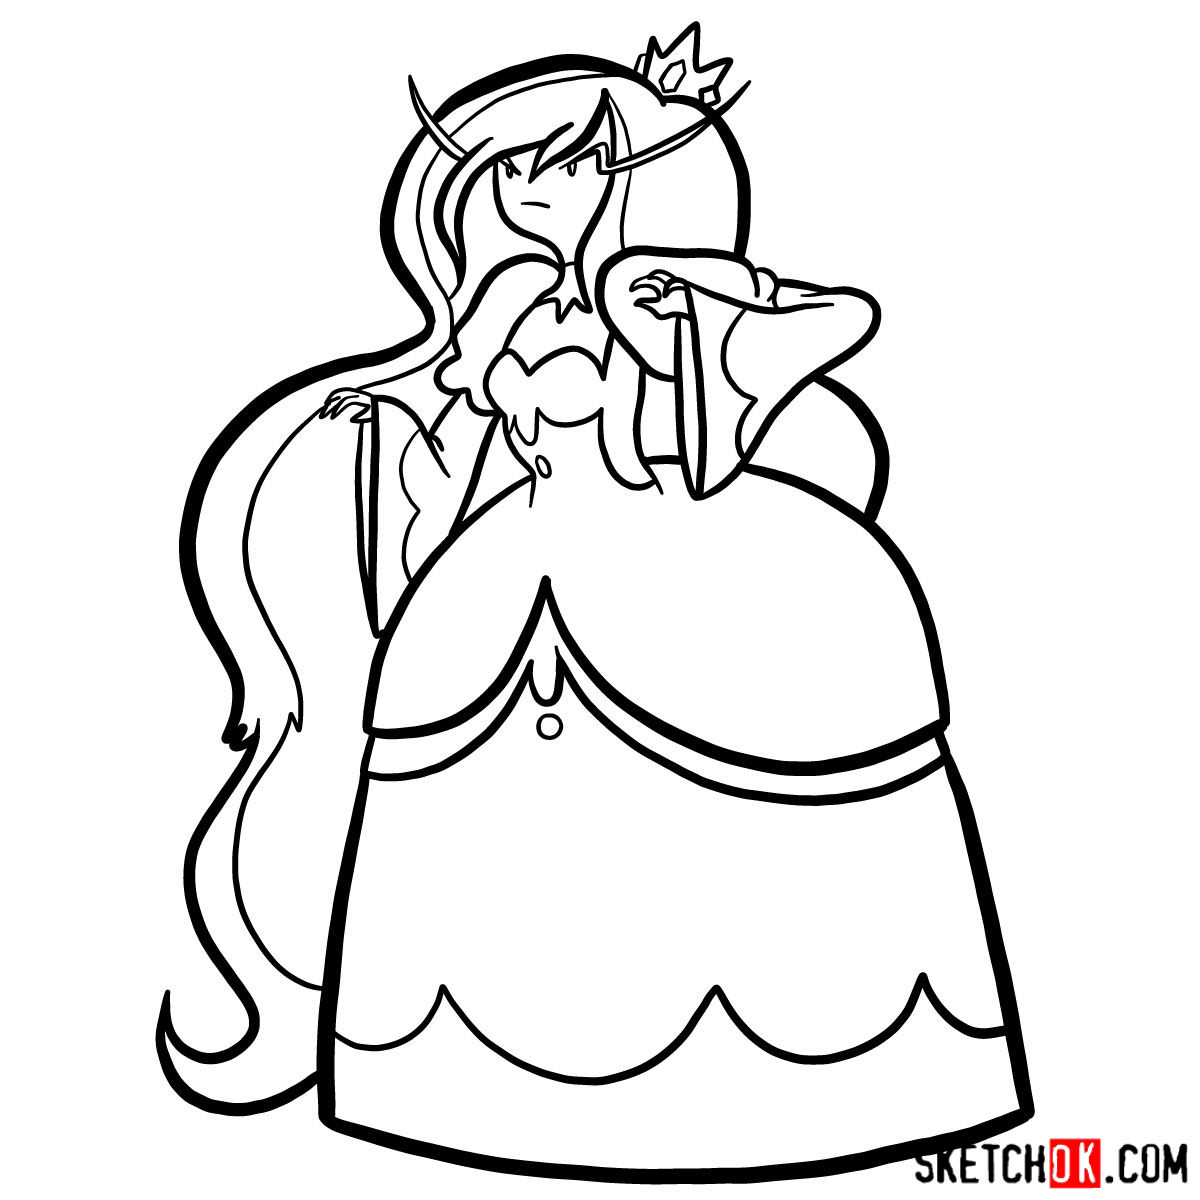 How to draw Ice Queen from Adventure Time - step 14